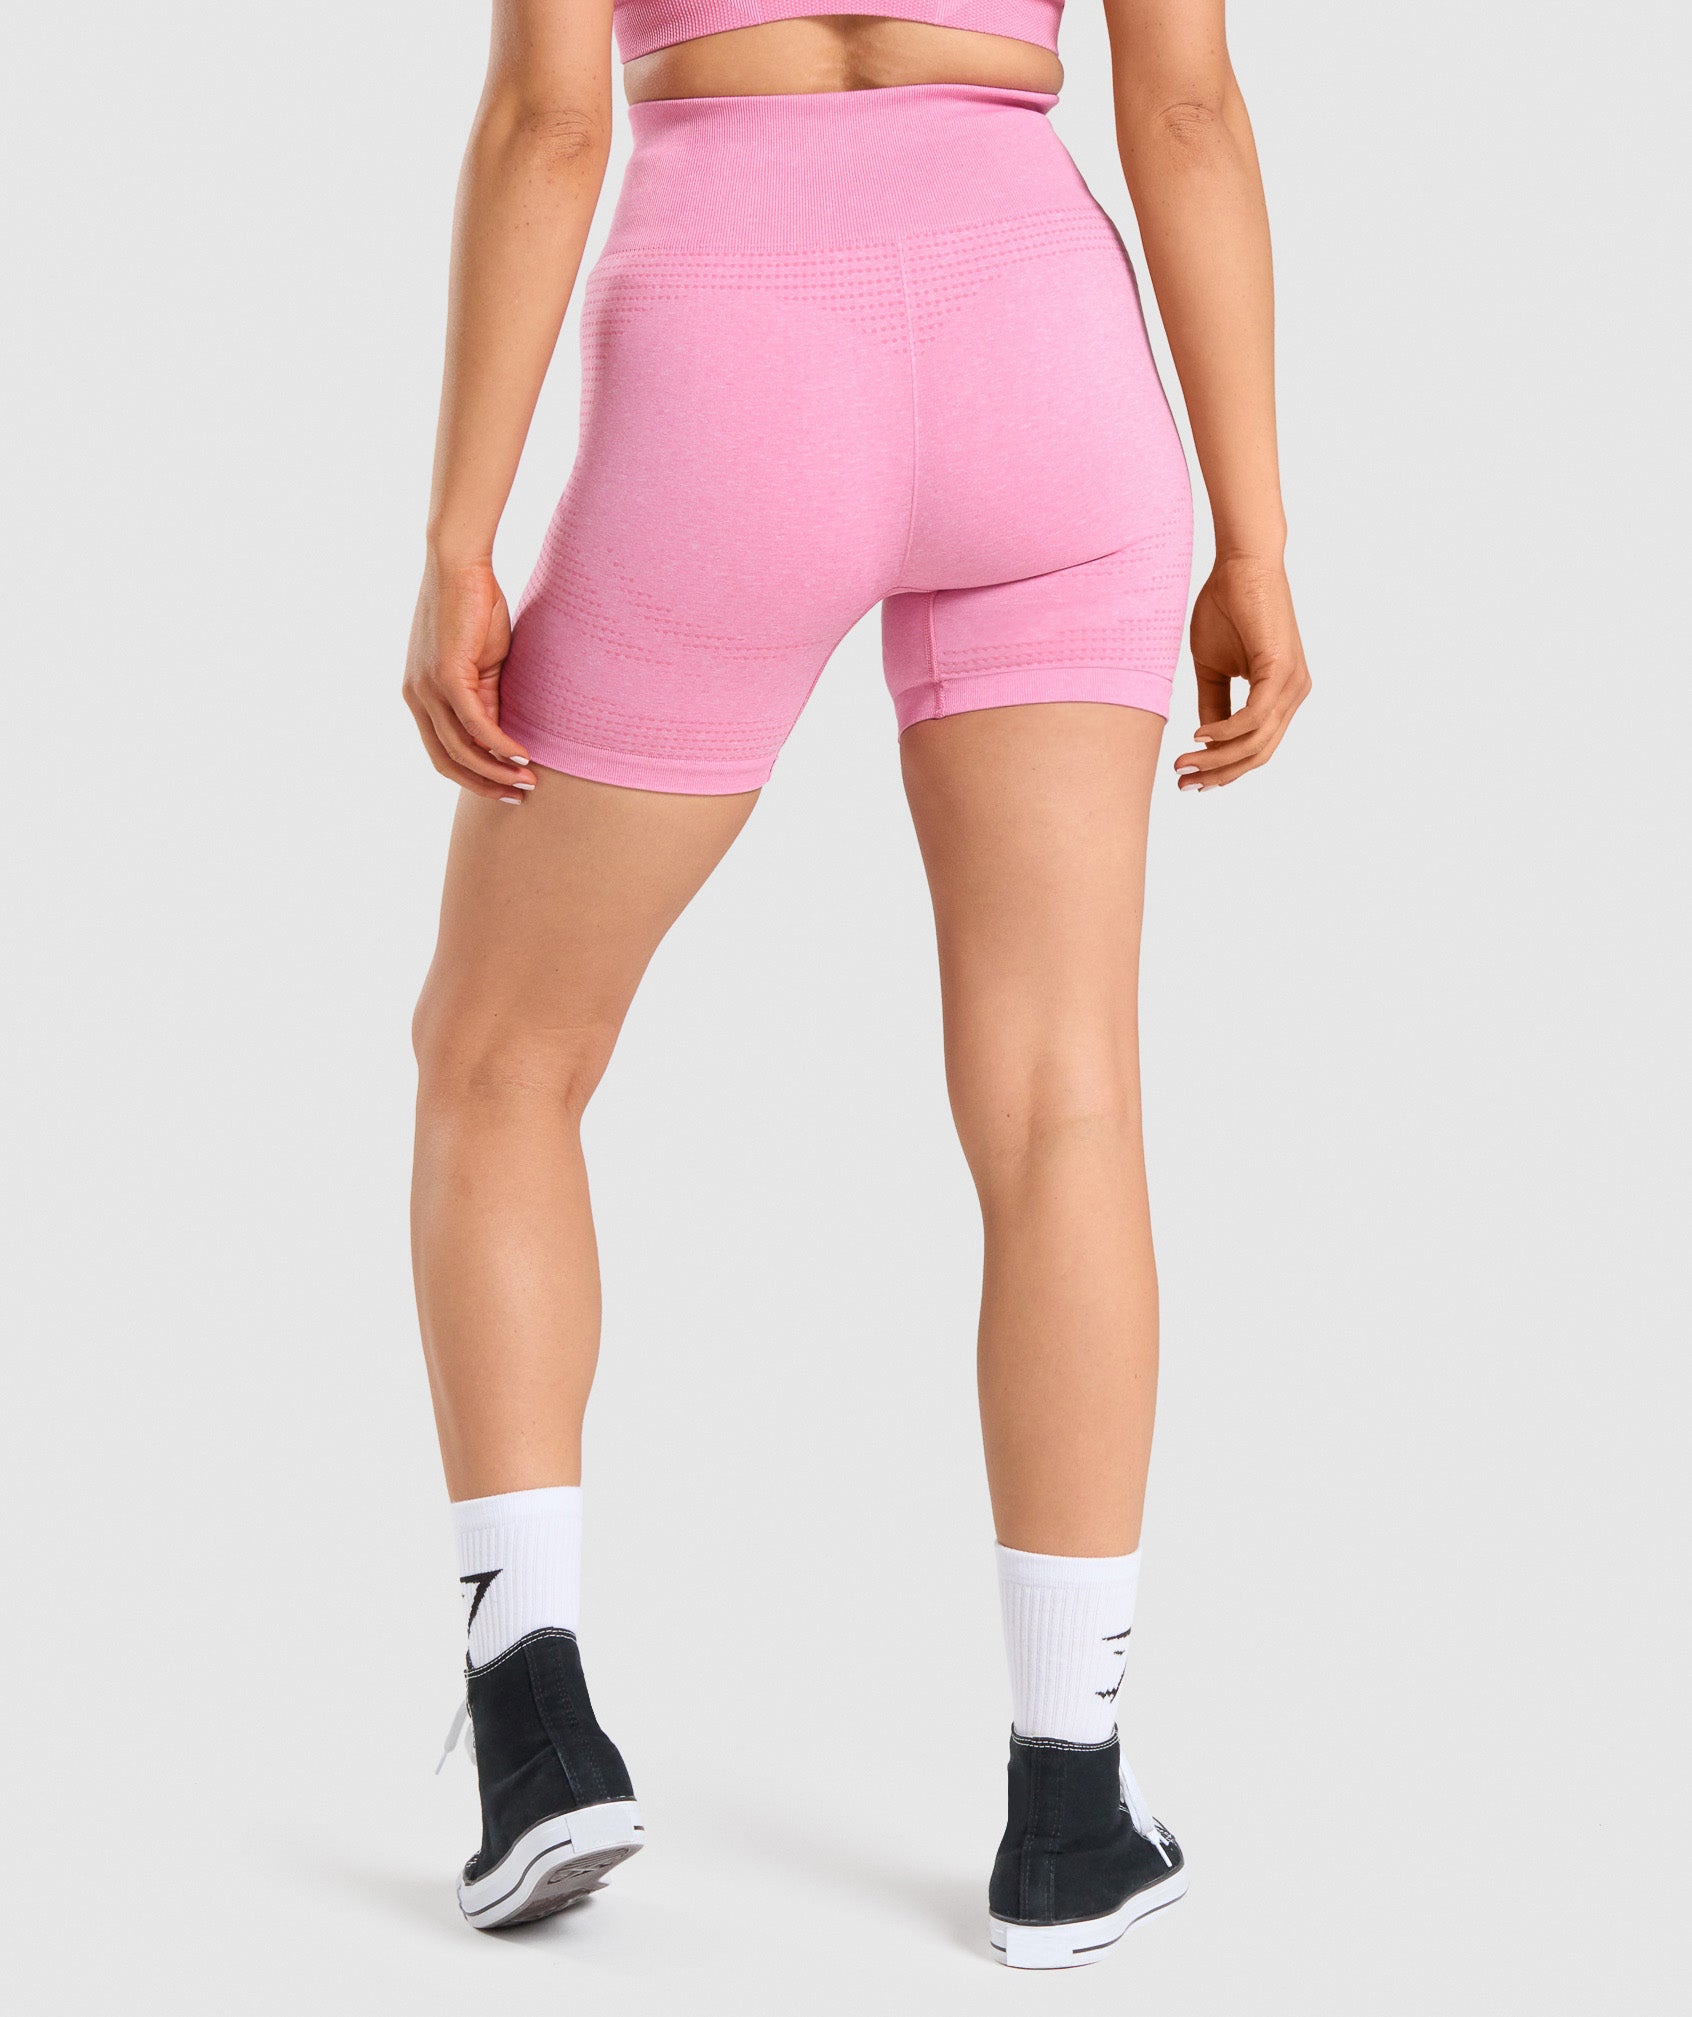 Gymshark vital seamless shorts pink  Gymshark, Gym shorts outfit, Gymshark  outfit